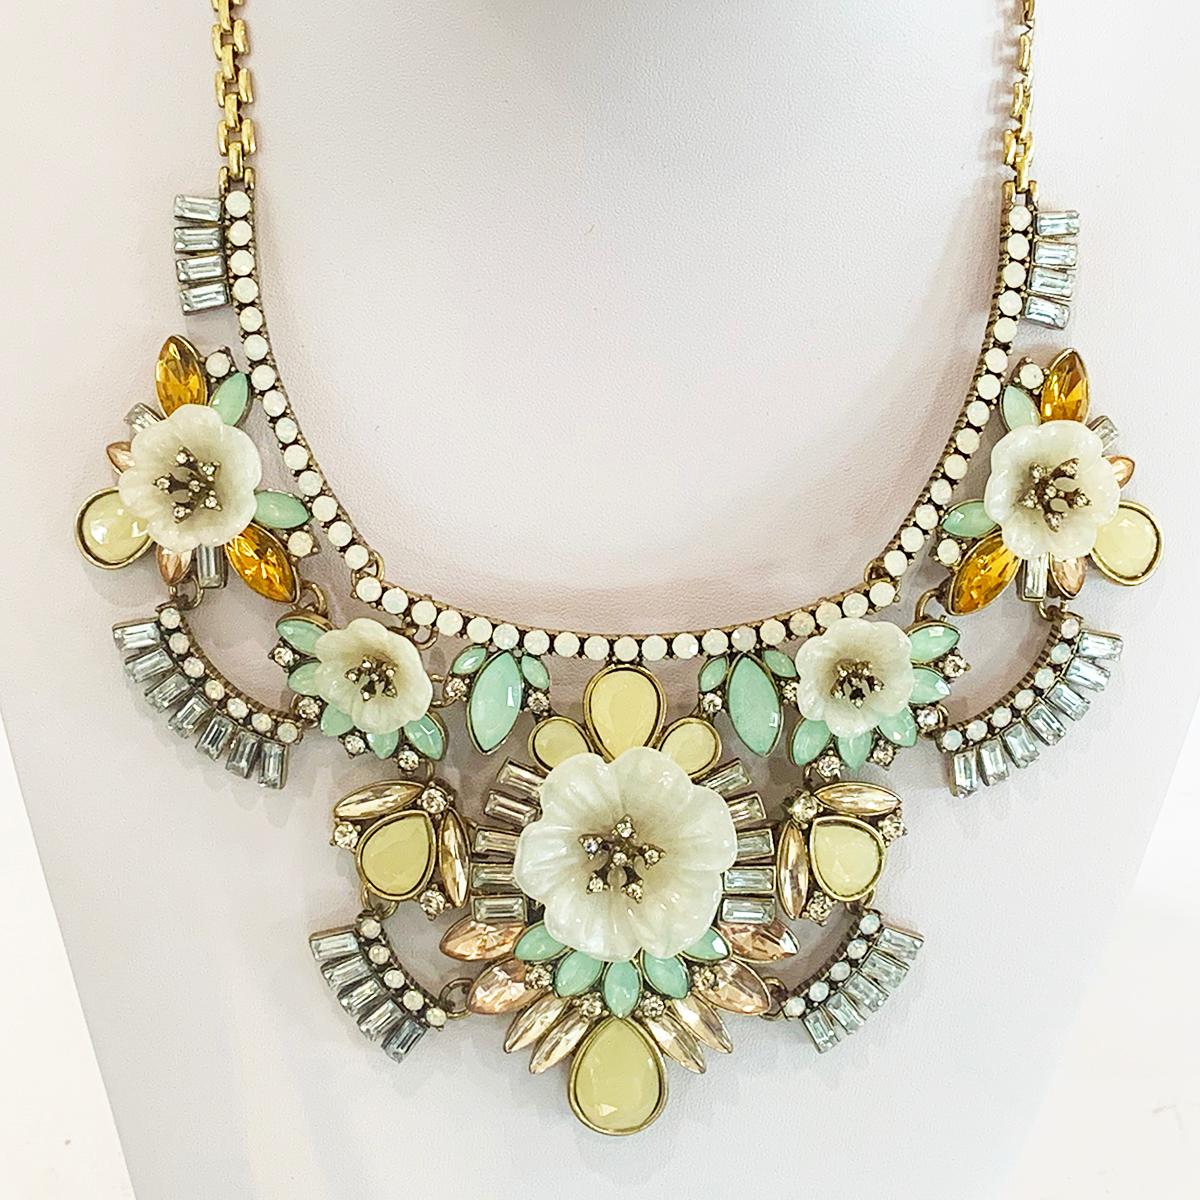 Authentic Oscar De La Renta Necklace with Pastel Glass flowers all with 5 point star centres with brilliant diamantes. Many other Diamantes in different shapes and colours, and a line of Milk Opal diamantes highlighting the upper Pendant edge and